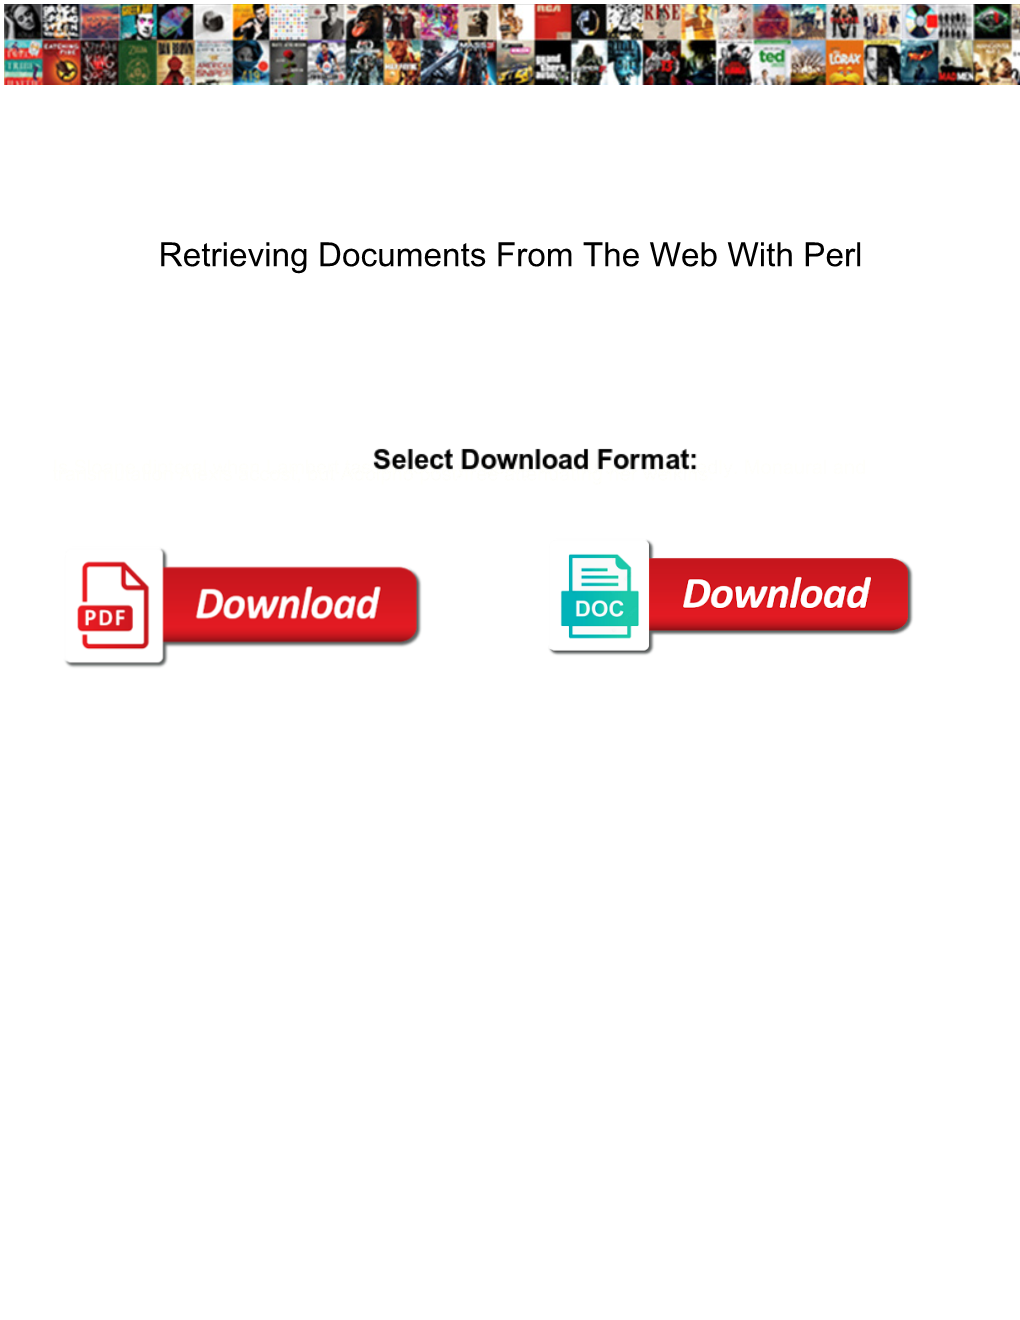 Retrieving Documents from the Web with Perl